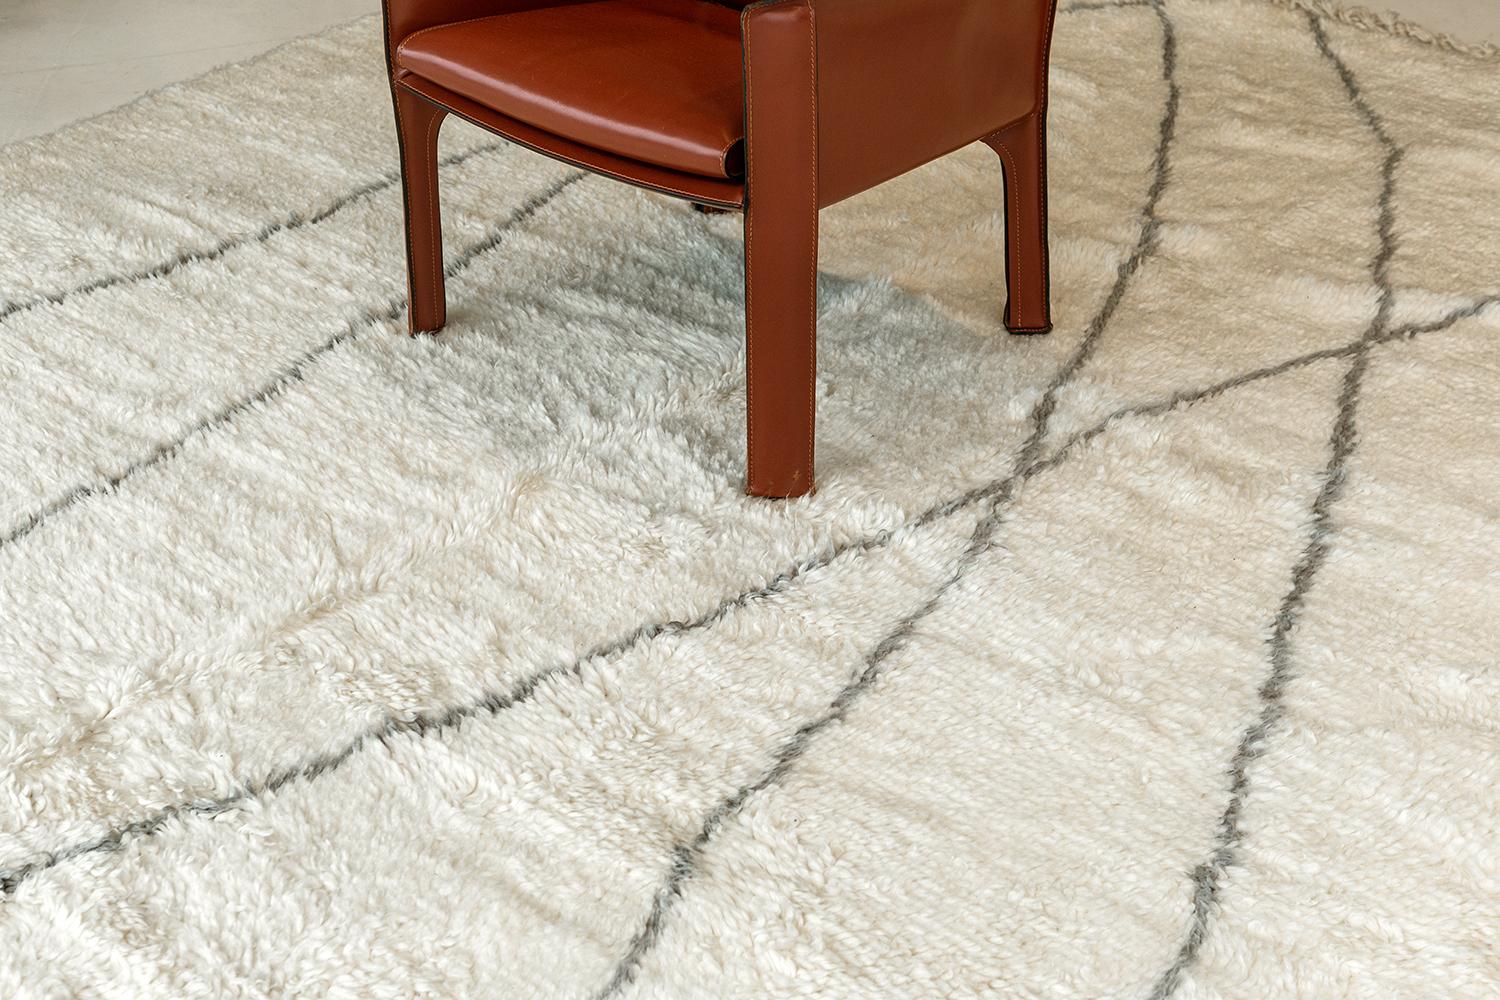 With its dreamy and comforting vibe, this remarkable rug called Bise’ in our Atlas collection features distinct linear accents gracefully spread along the plush textured cream field. The astonishing tassels perfectly match the totality of this work